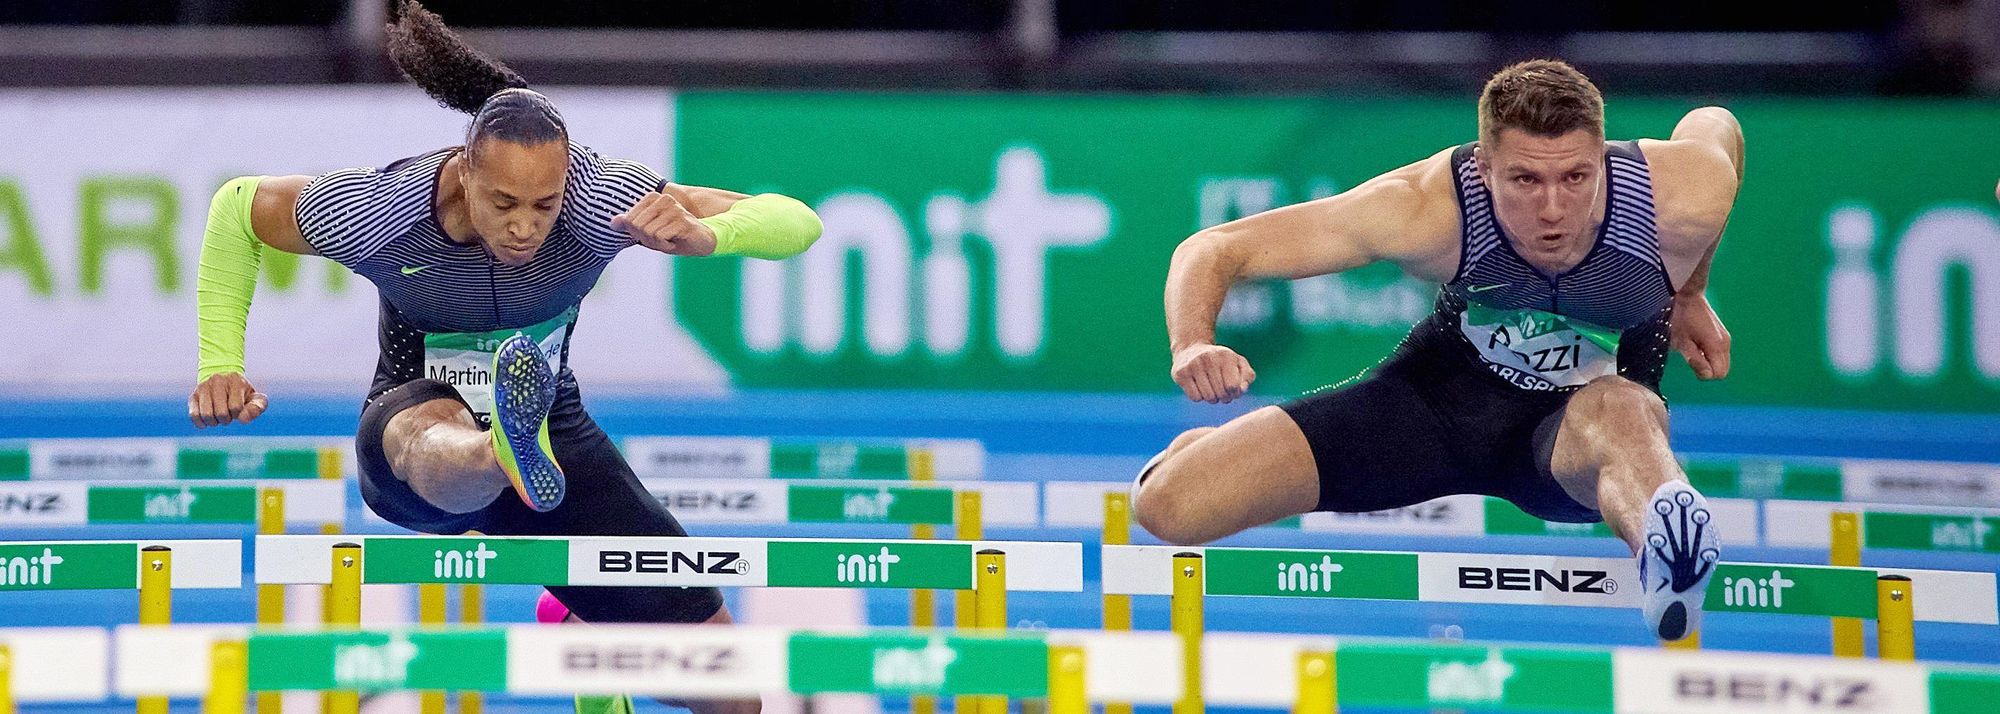 World indoor champion Andrew Pozzi is to open his World Athletics Indoor Tour Gold campaign at the INIT Indoor Meeting Karlsruhe.